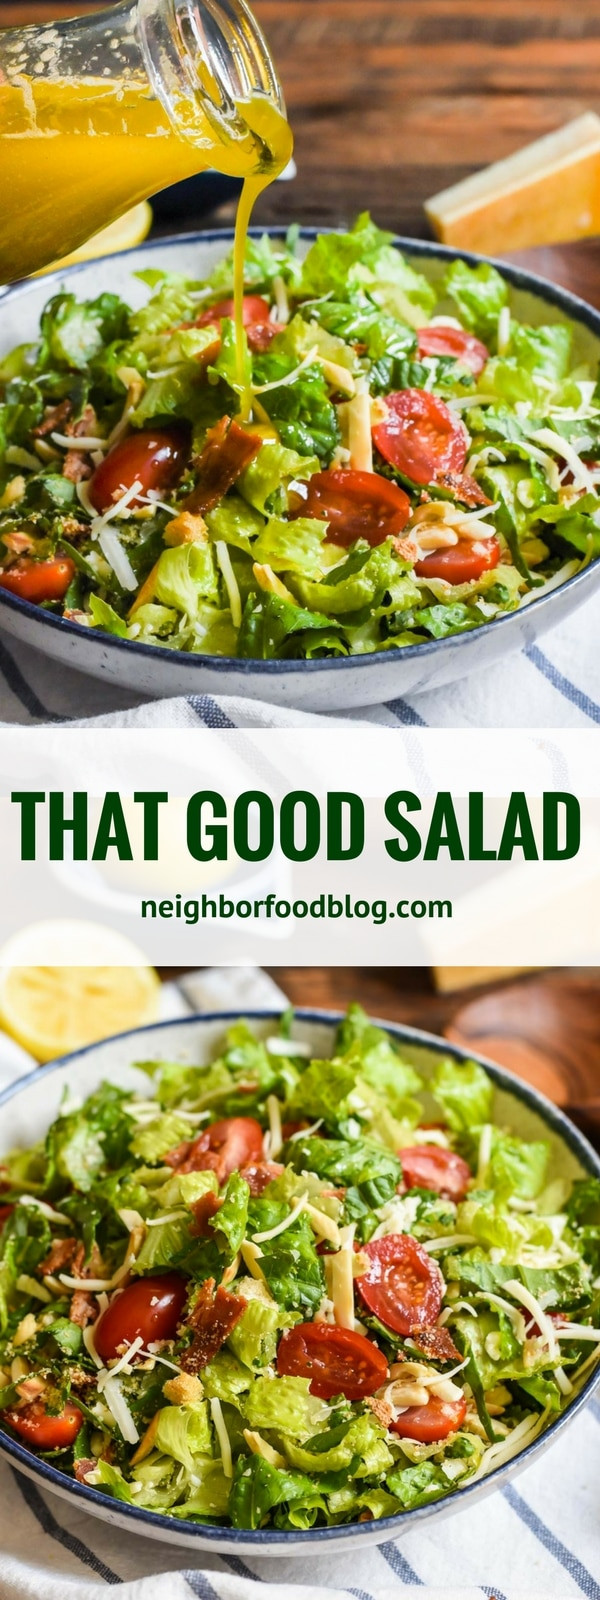 Salad Ideas For Dinner Party
 That Good Salad